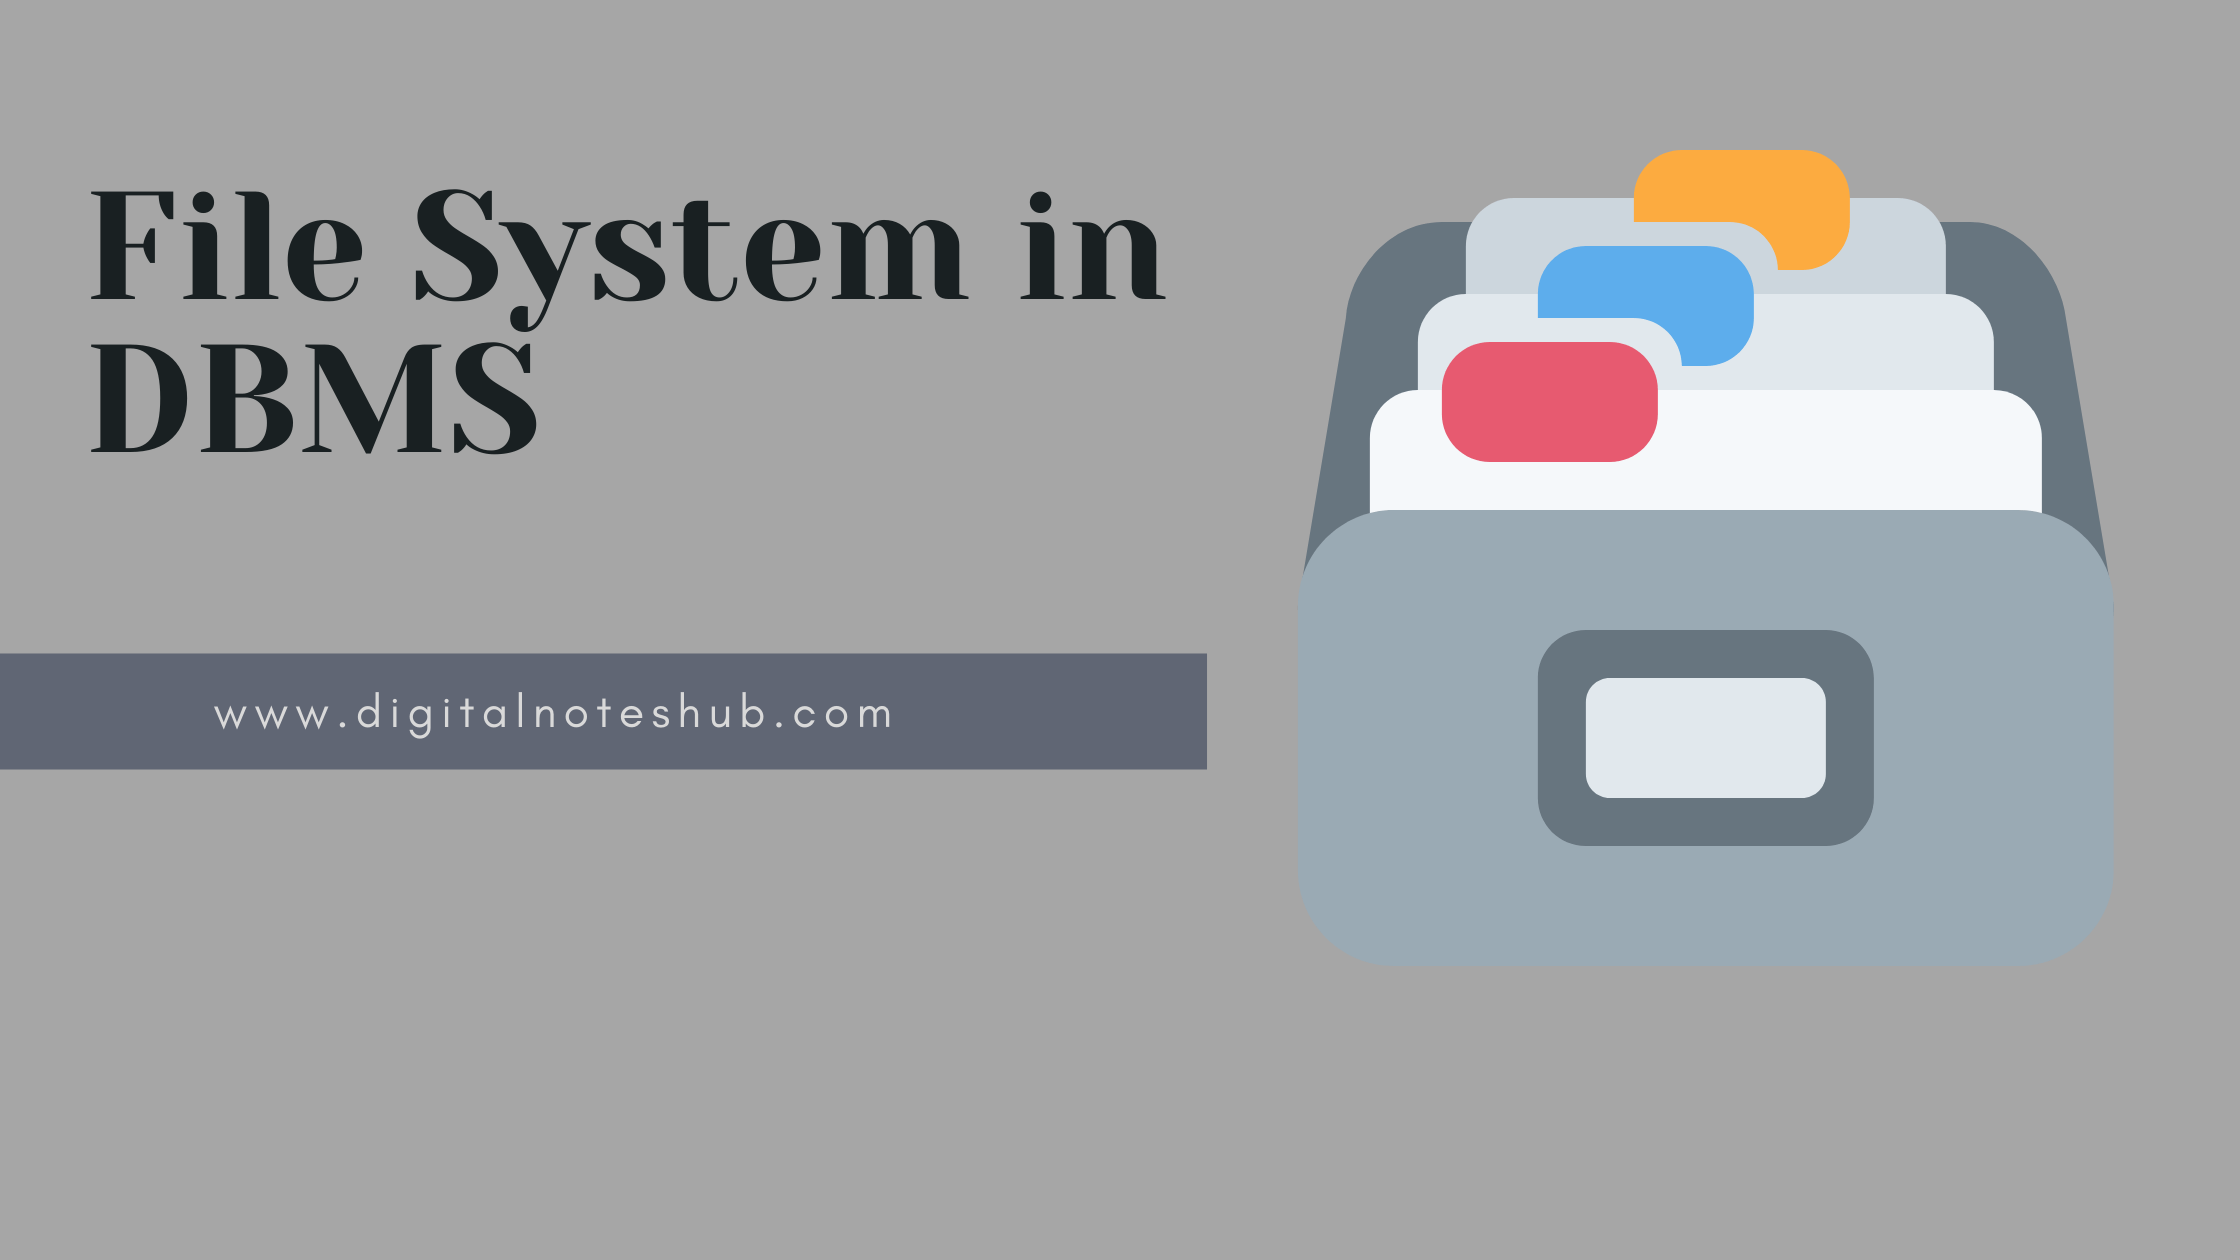 File system in dbms